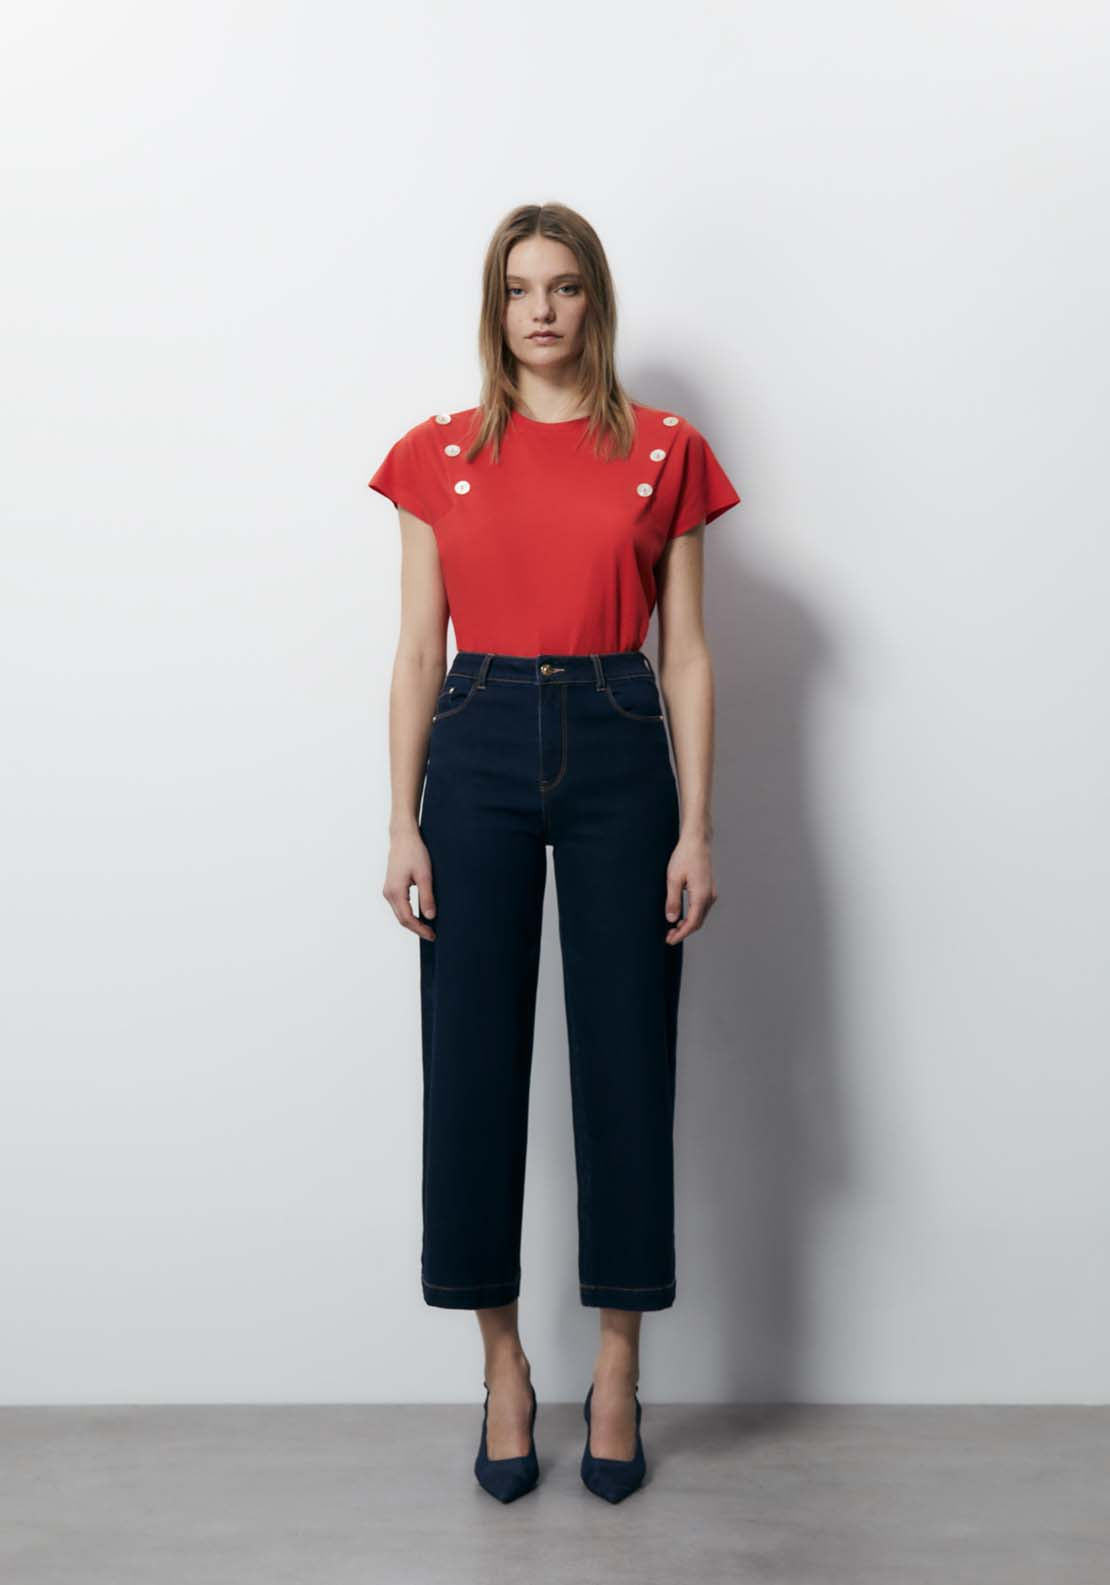 Sfera Short Sleeve Top - Red 3 Shaws Department Stores